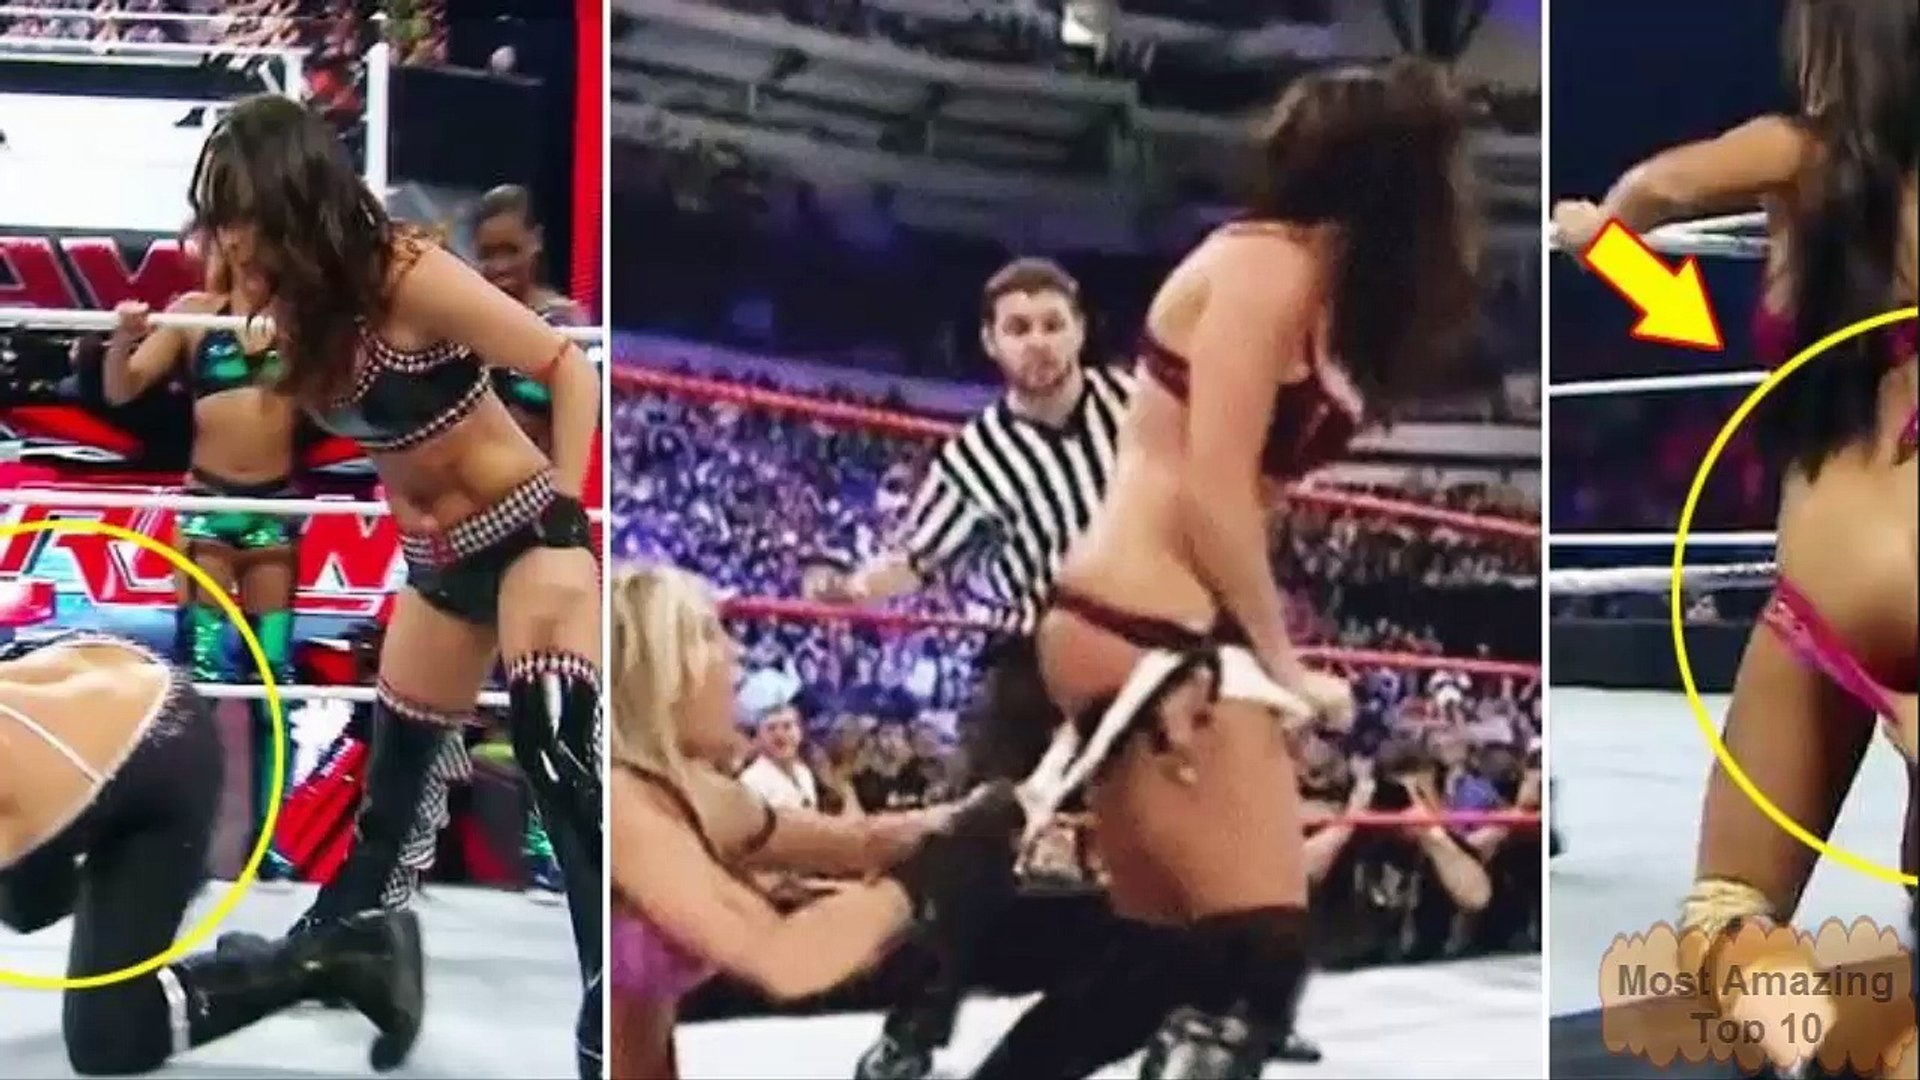 Top 10 Most Shocking Moments Of Nudity In Wwe Video 